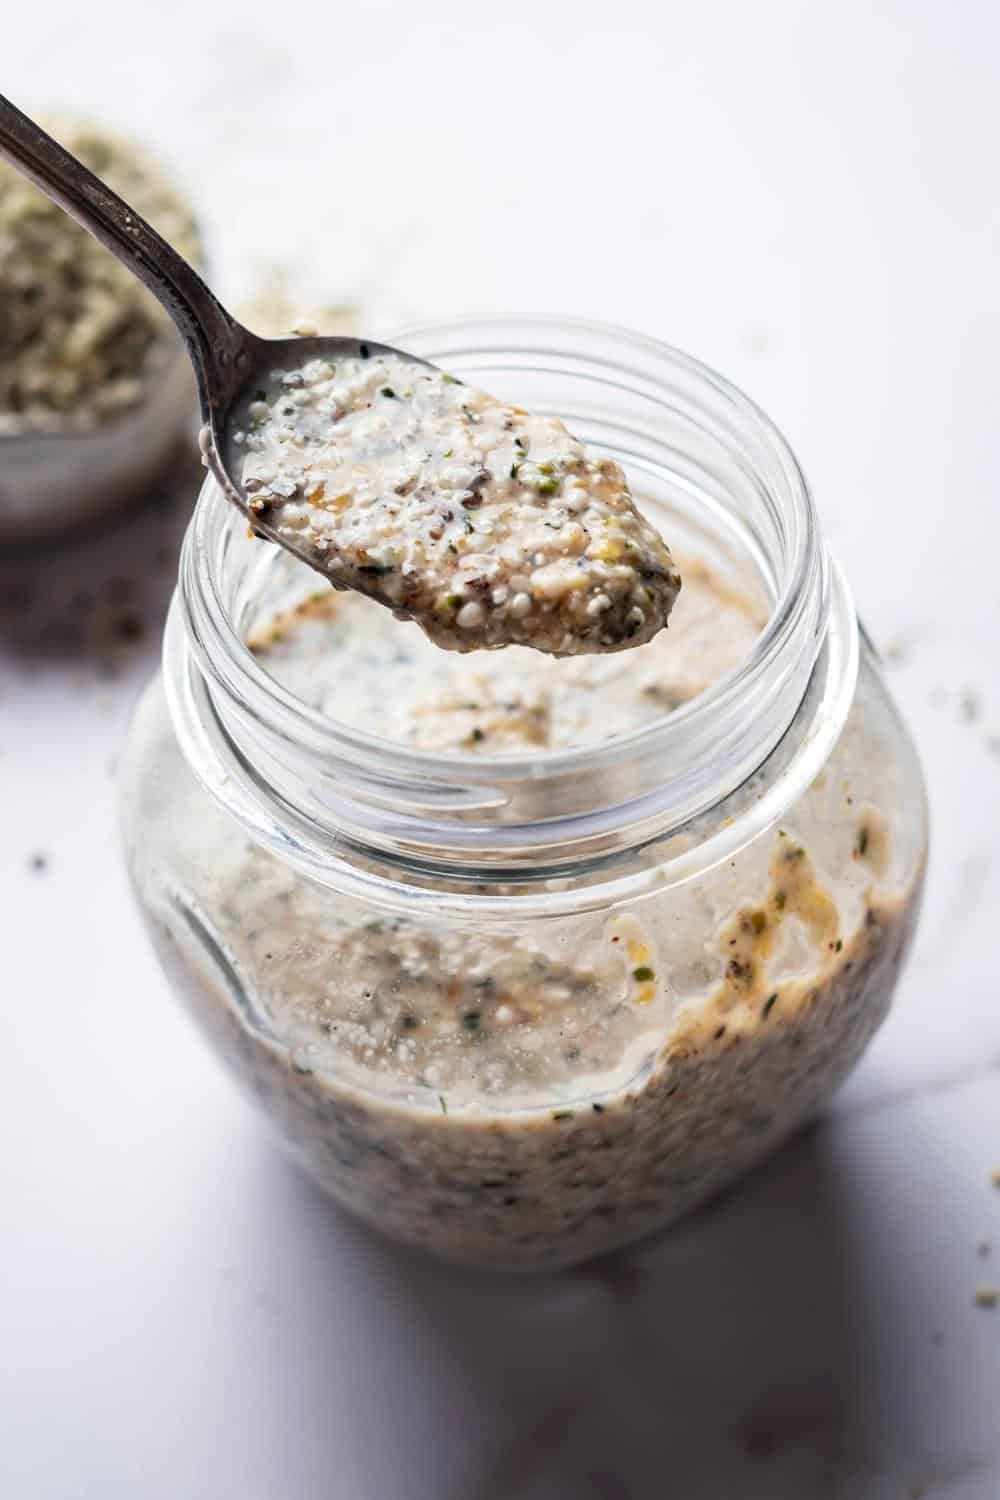 A spoon with keto overnight oats on it above a glass jar that is filled with the keto overnight oats.